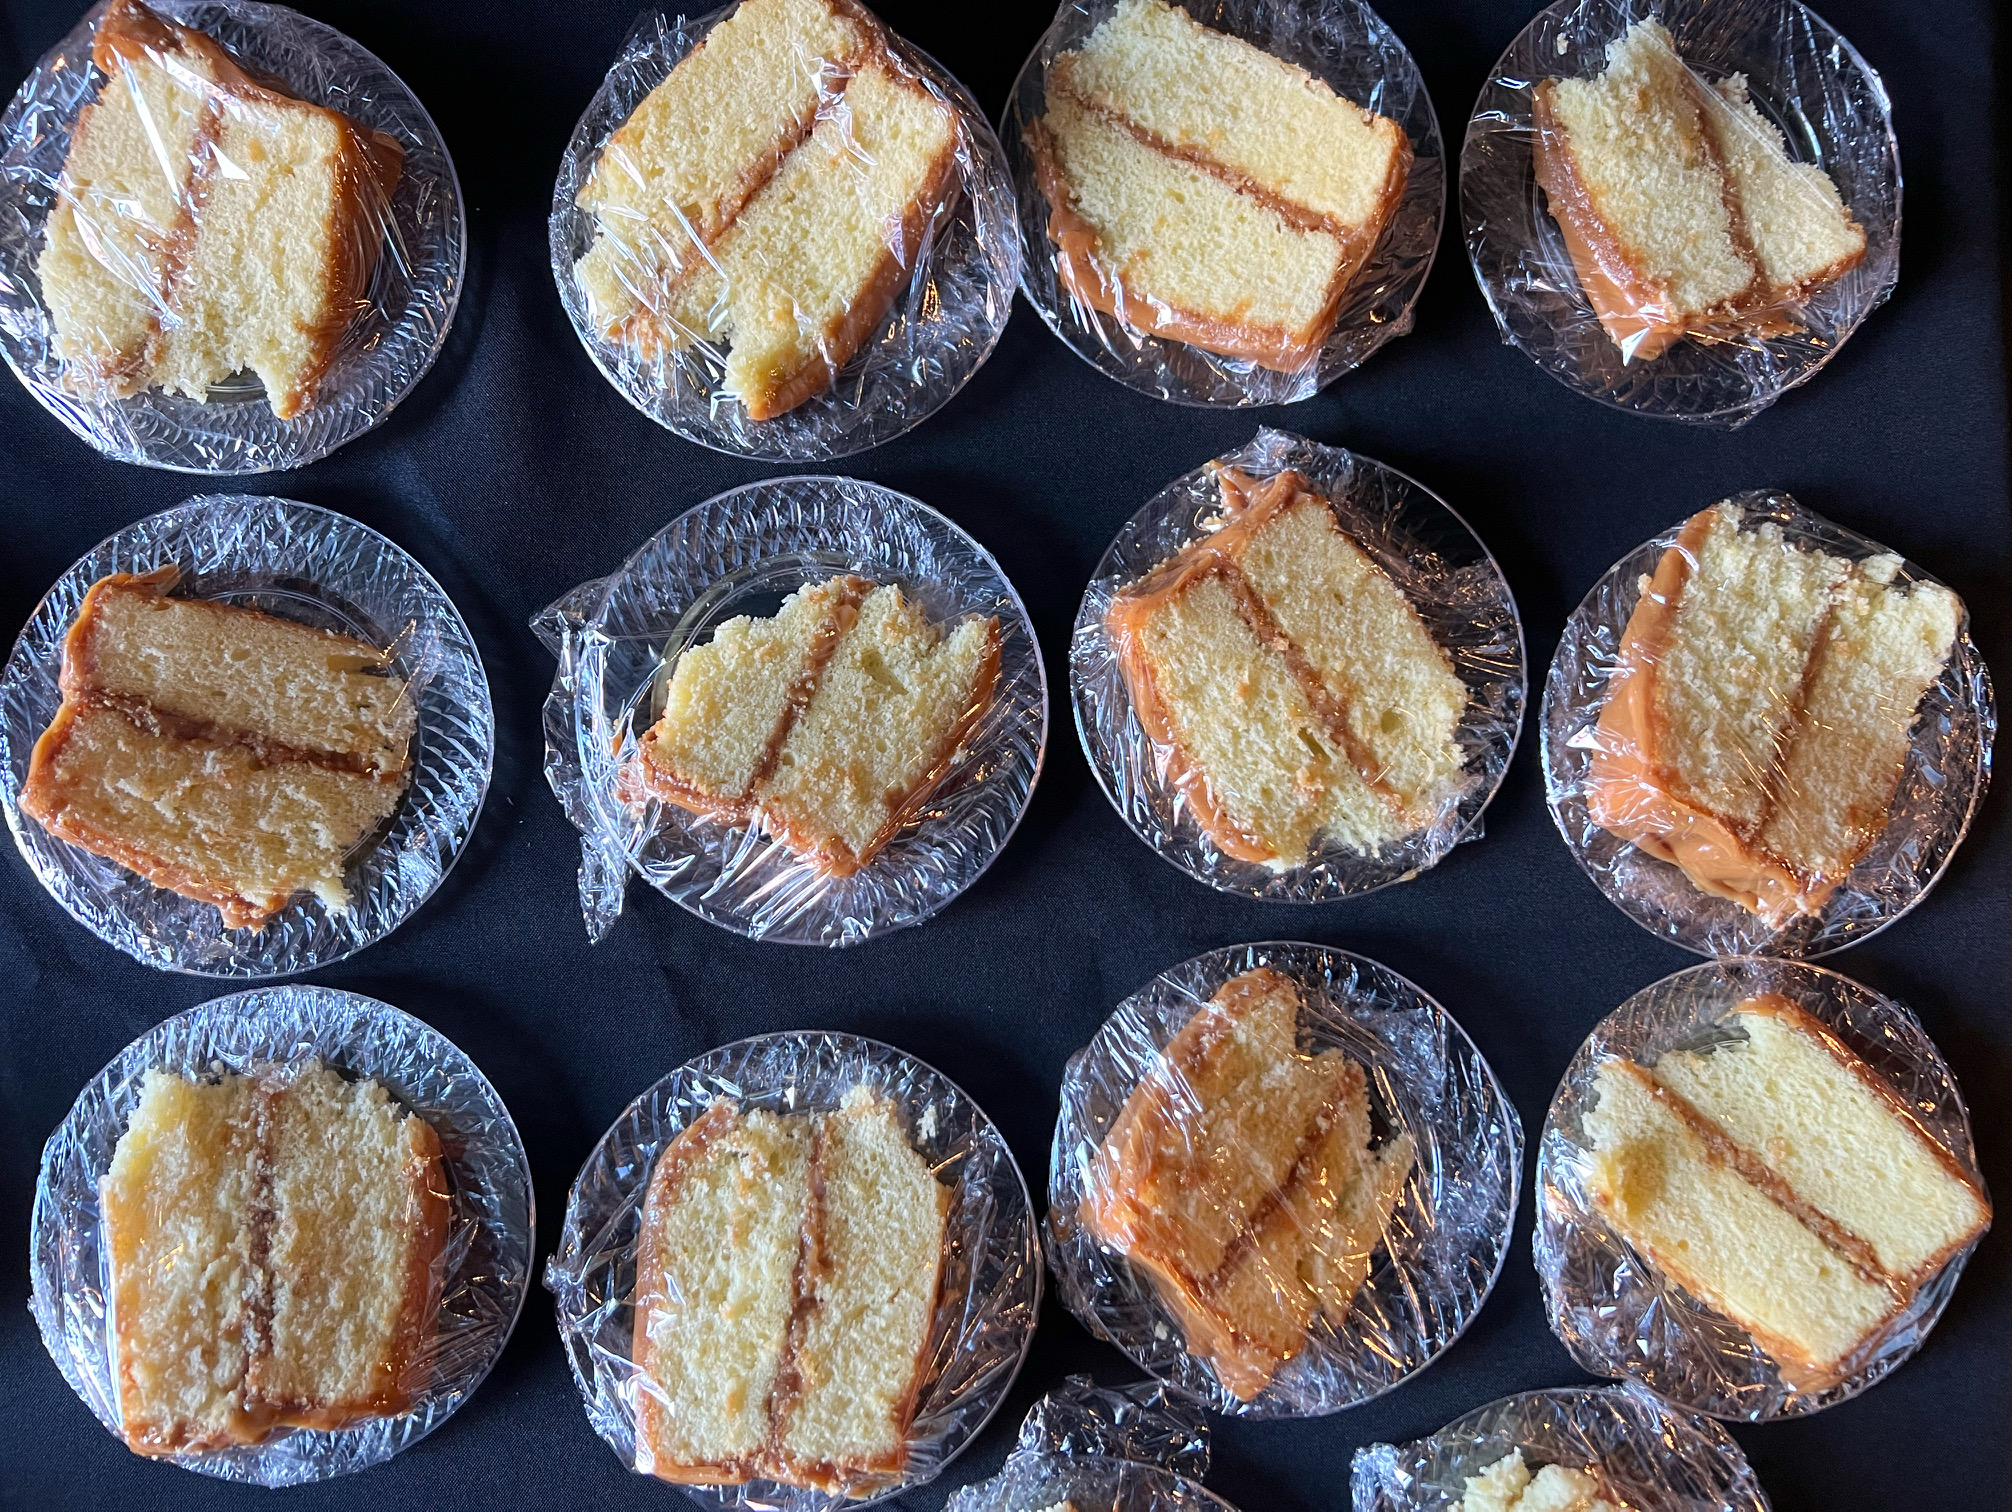 On a black table at Neil St. Blues, there are many plastic plates with slices of vanilla cake and a light brown caramel frosting. Each slice is wrapped in plastic wrap to a plate. Photo by Alyssa Buckley.